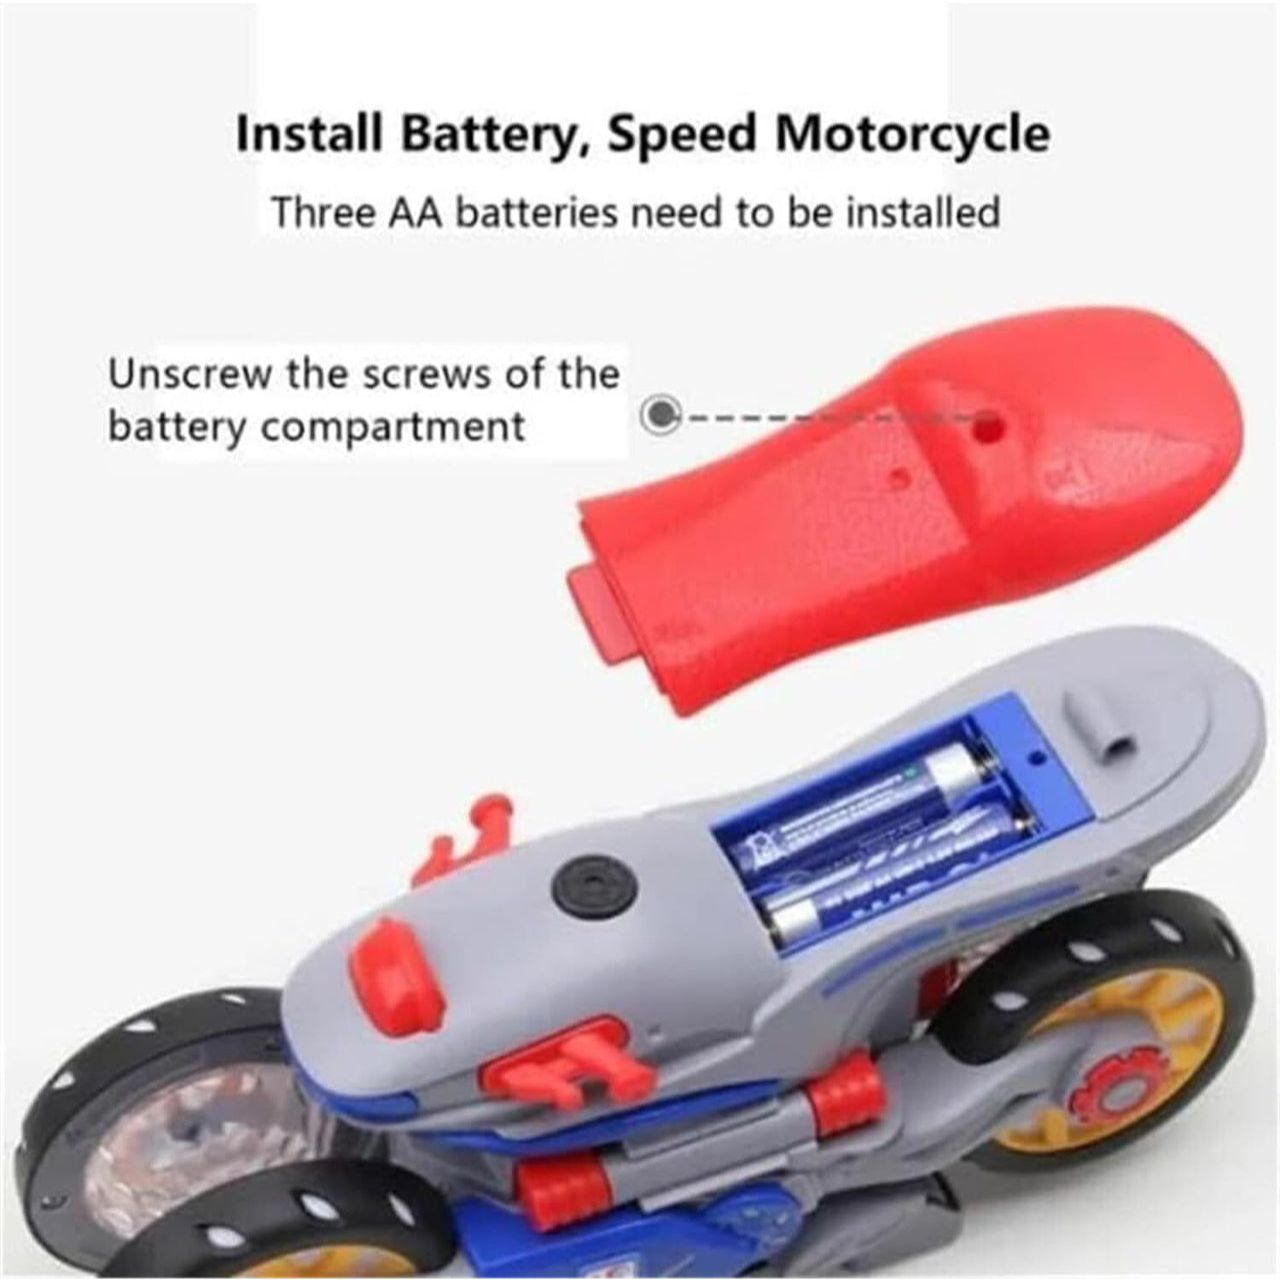 Stop Motor | 360 Rotate Motor Cycle with Lightning Effect